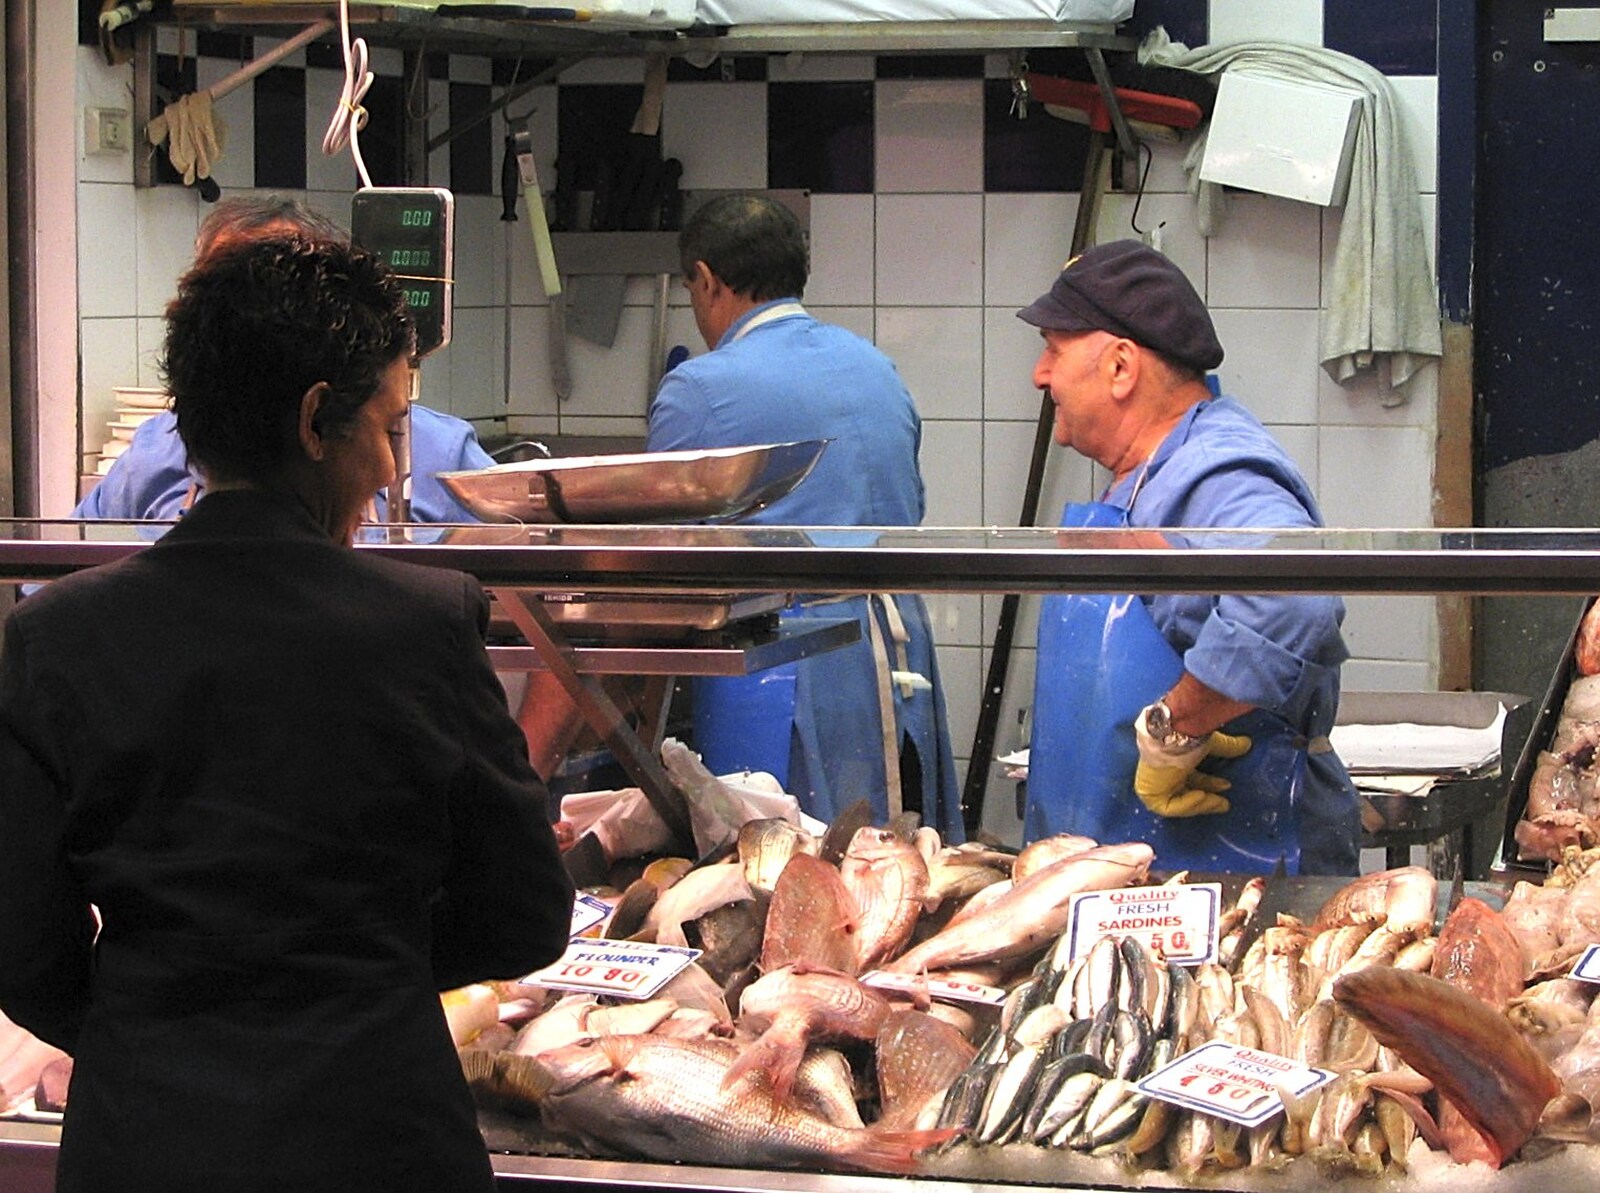 Fish in Queen Victoria Market from A Couple of Days in Melbourne, Victoria, Australia - 5th October 2004